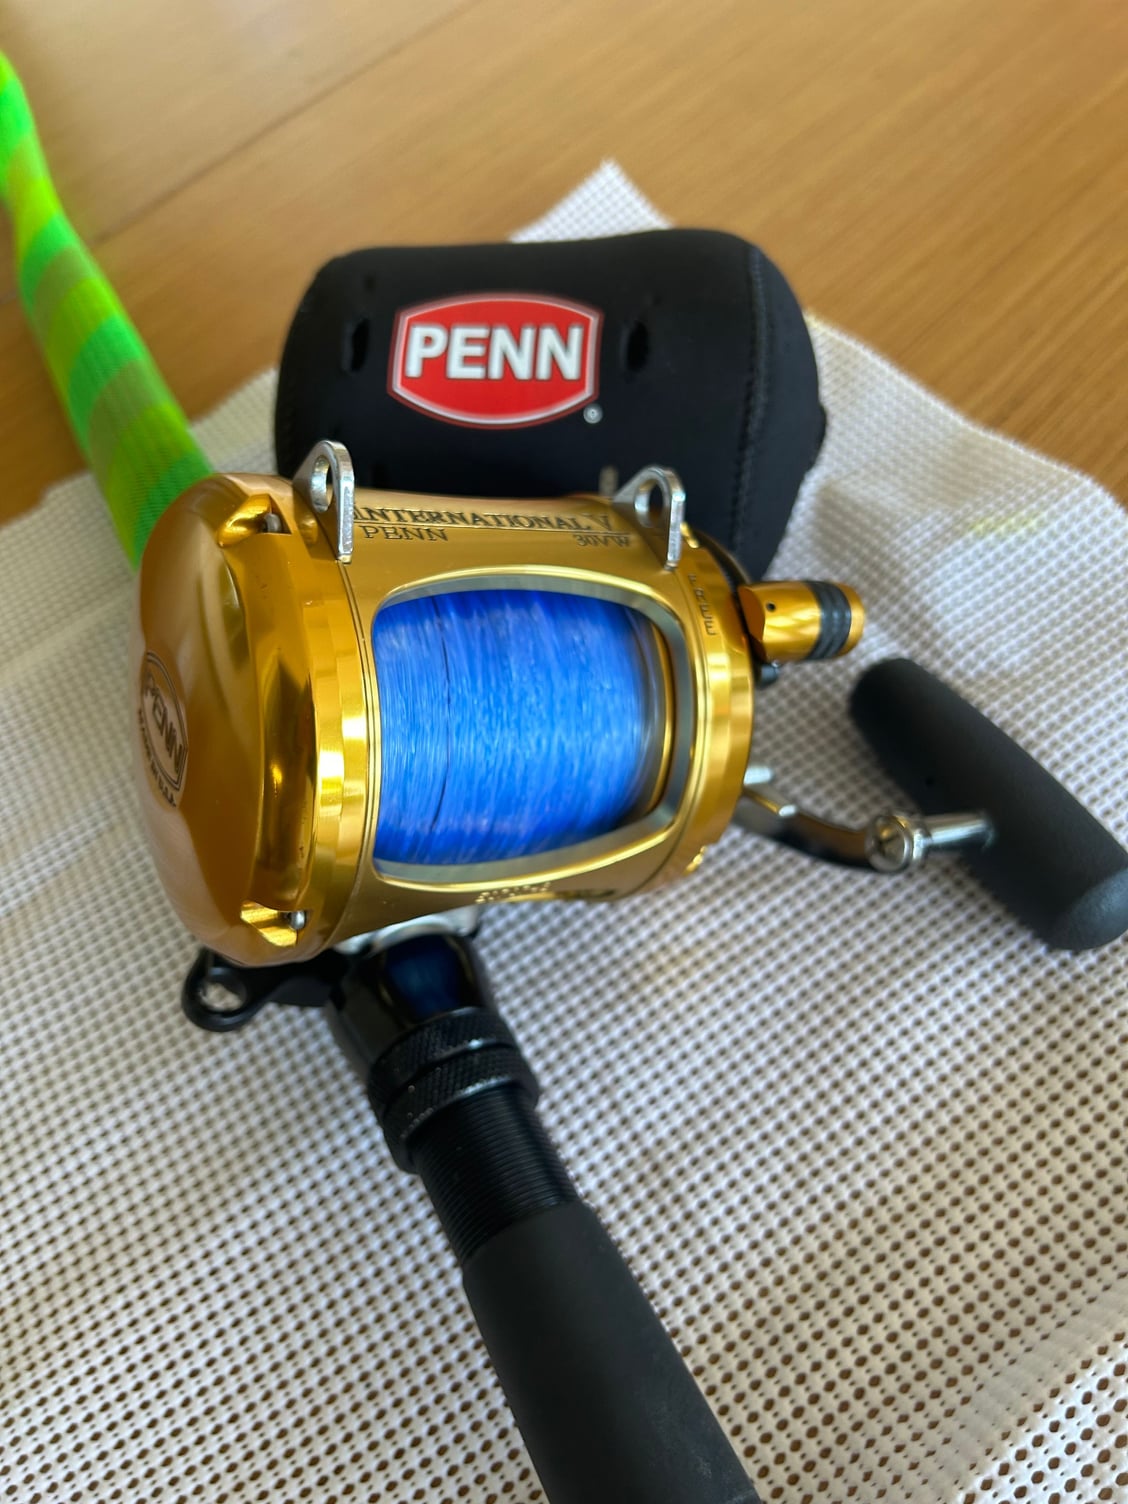 Penn International 30 Reels For Sale - The Hull Truth - Boating and Fishing  Forum